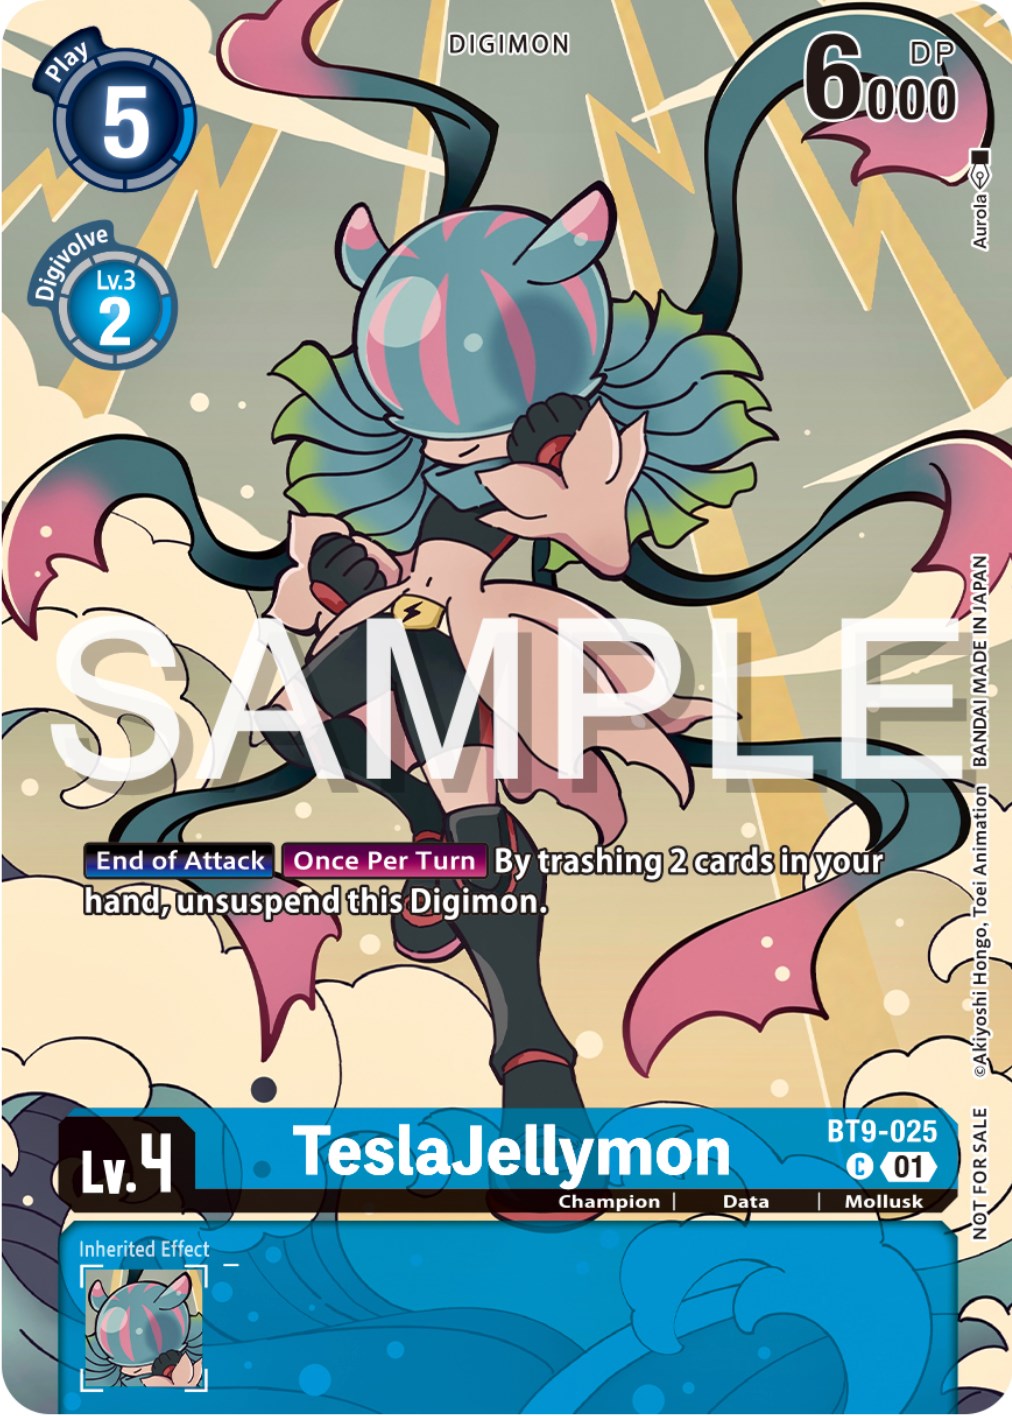 TeslaJellymon [BT9-025] (Digimon Illustration Competition Pack 2023) [X Record Promos] | Amazing Games TCG